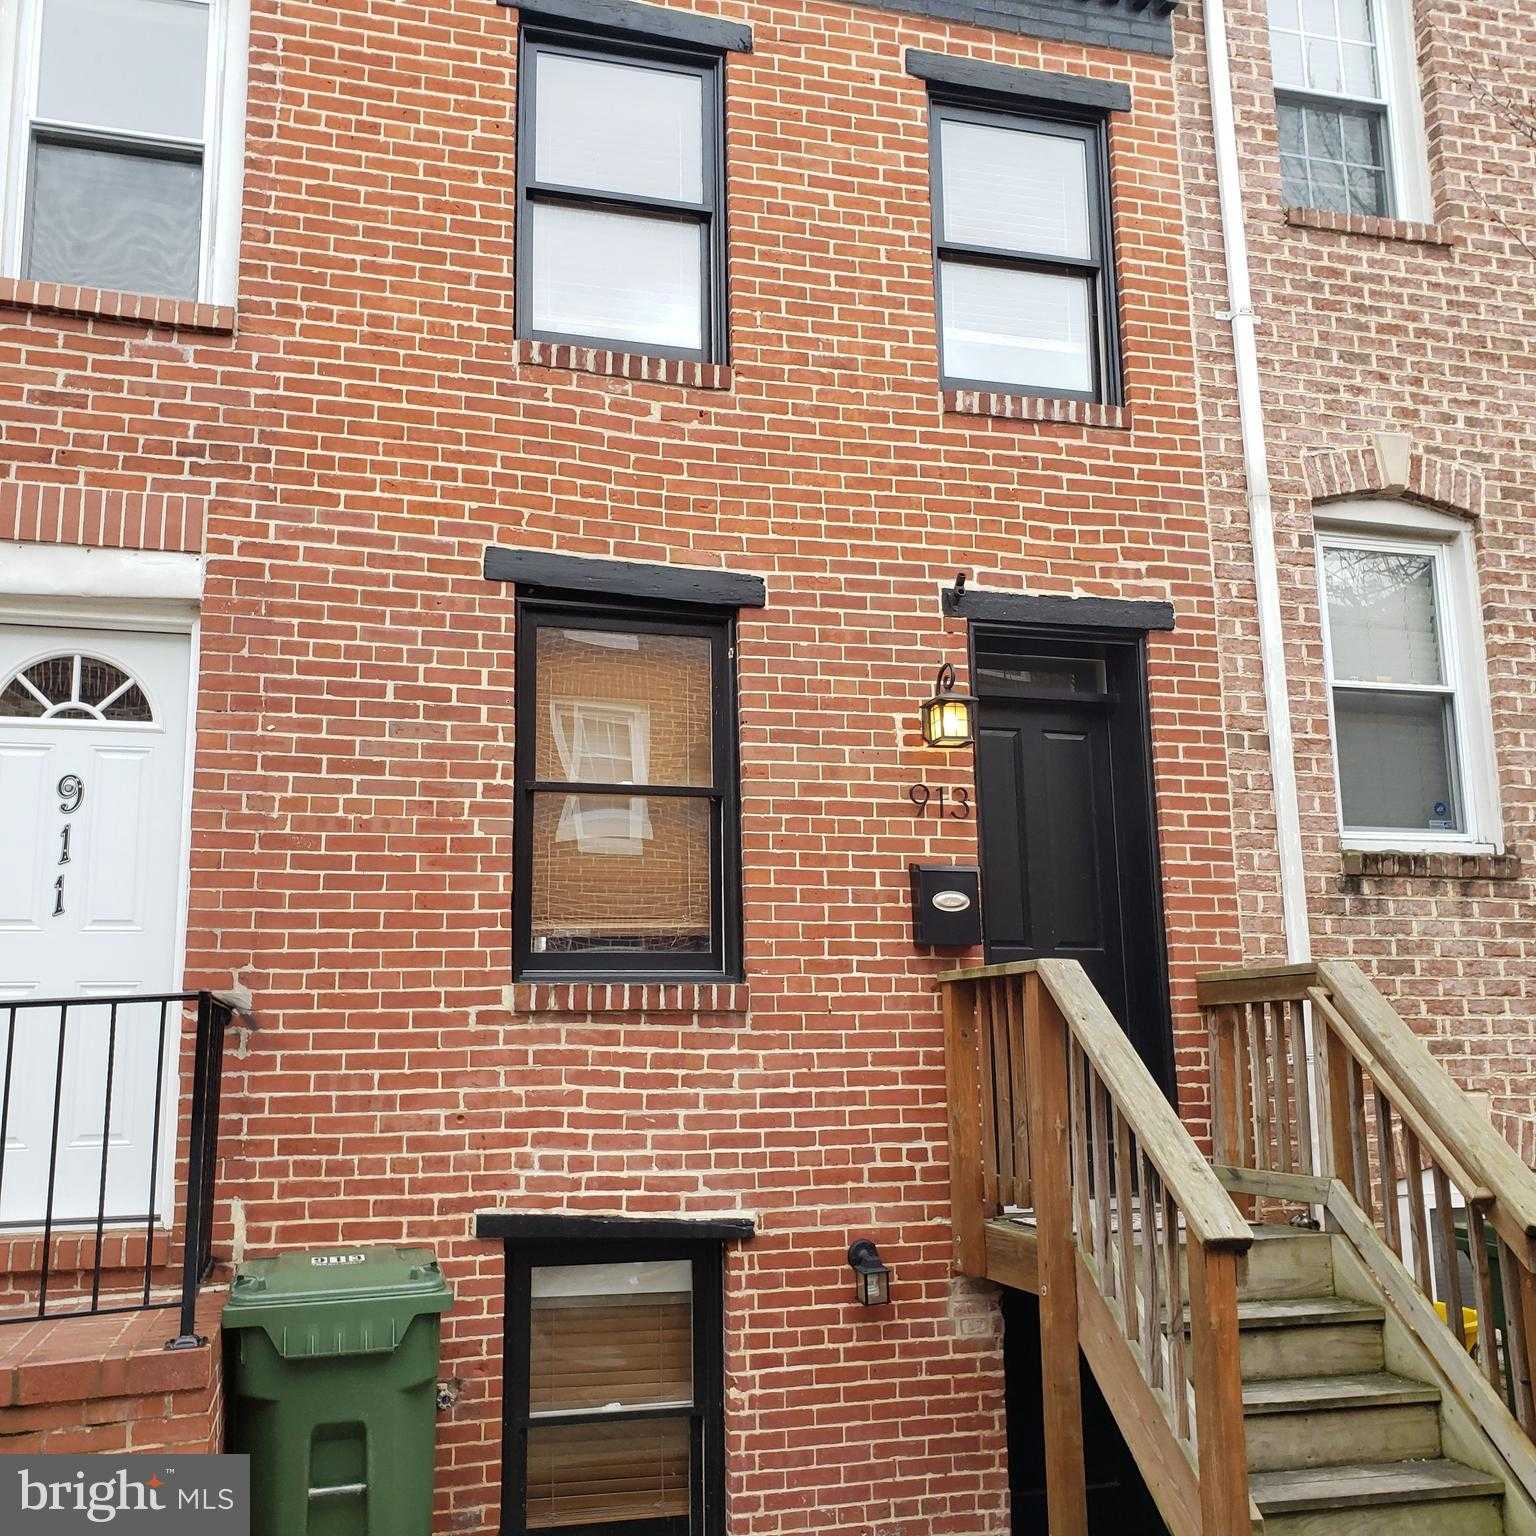 View BALTIMORE, MD 21223 townhome